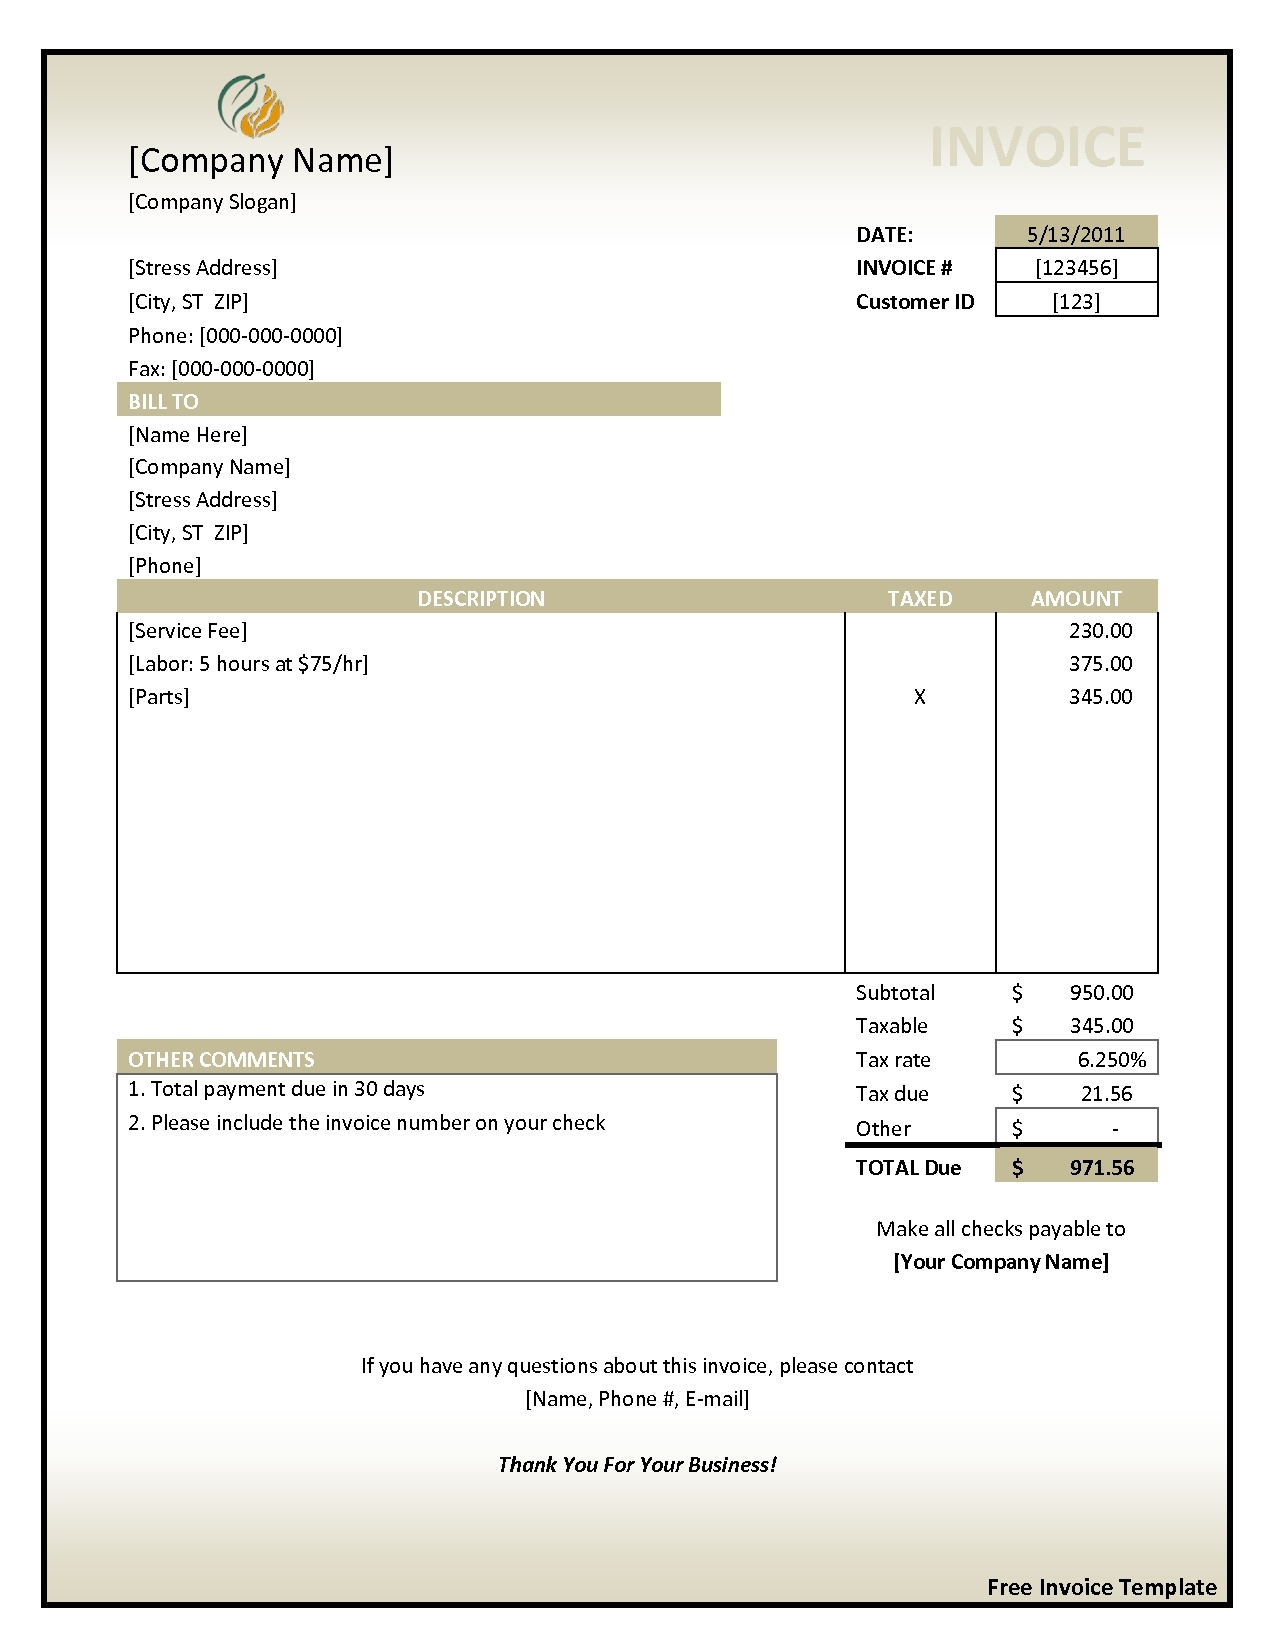 download sample invoice invoice template free 2016 free download invoice